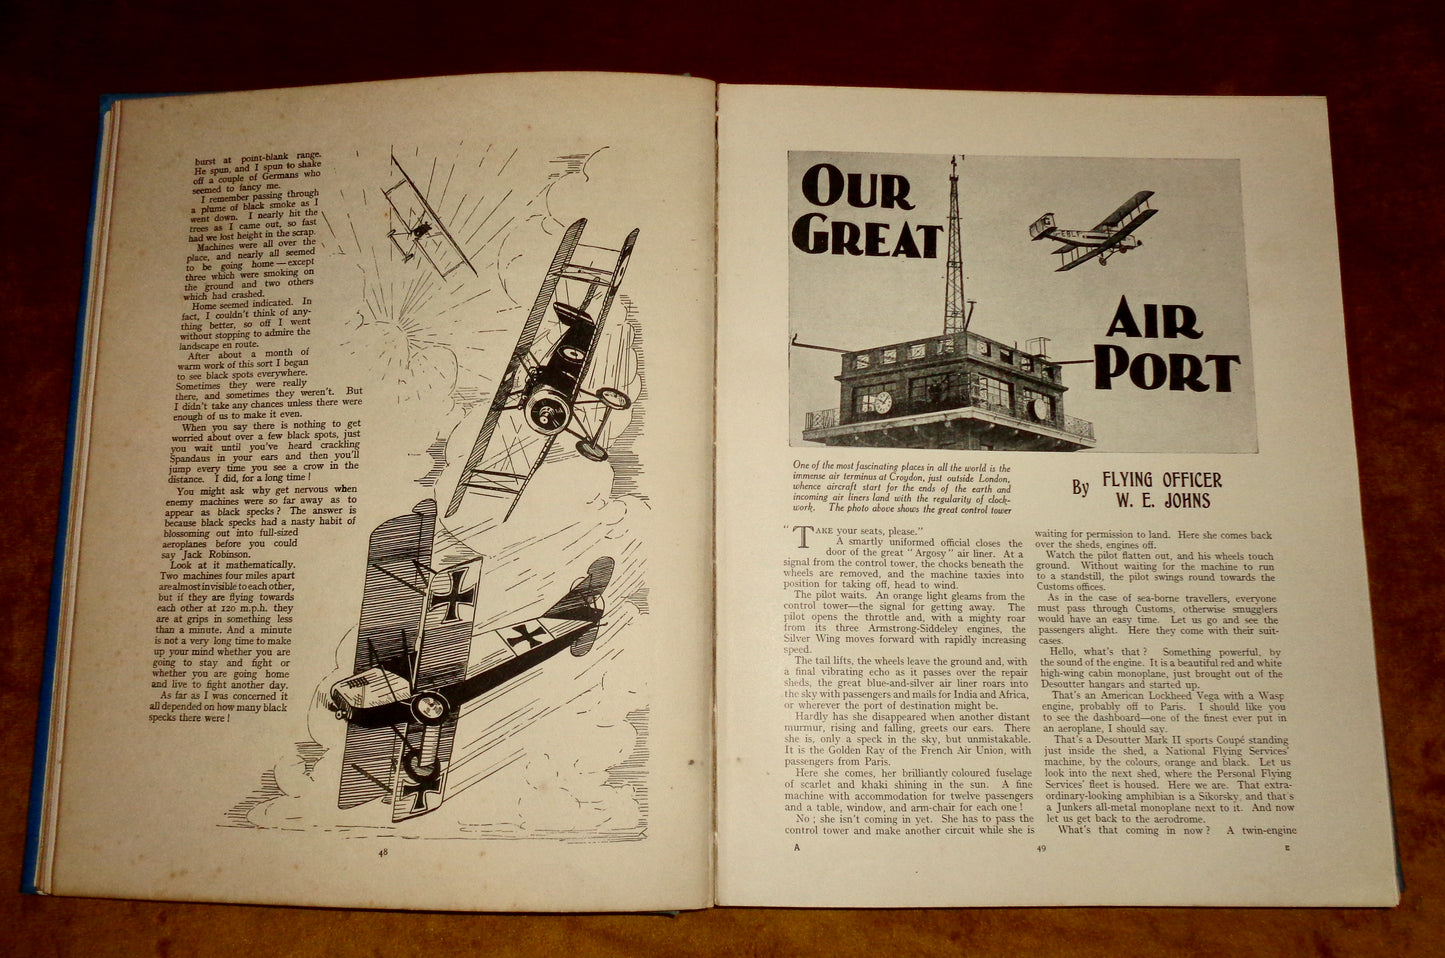 1931 The Modern Boy's Book Of Aircraft With Articles By WE Johns & Other Pilots